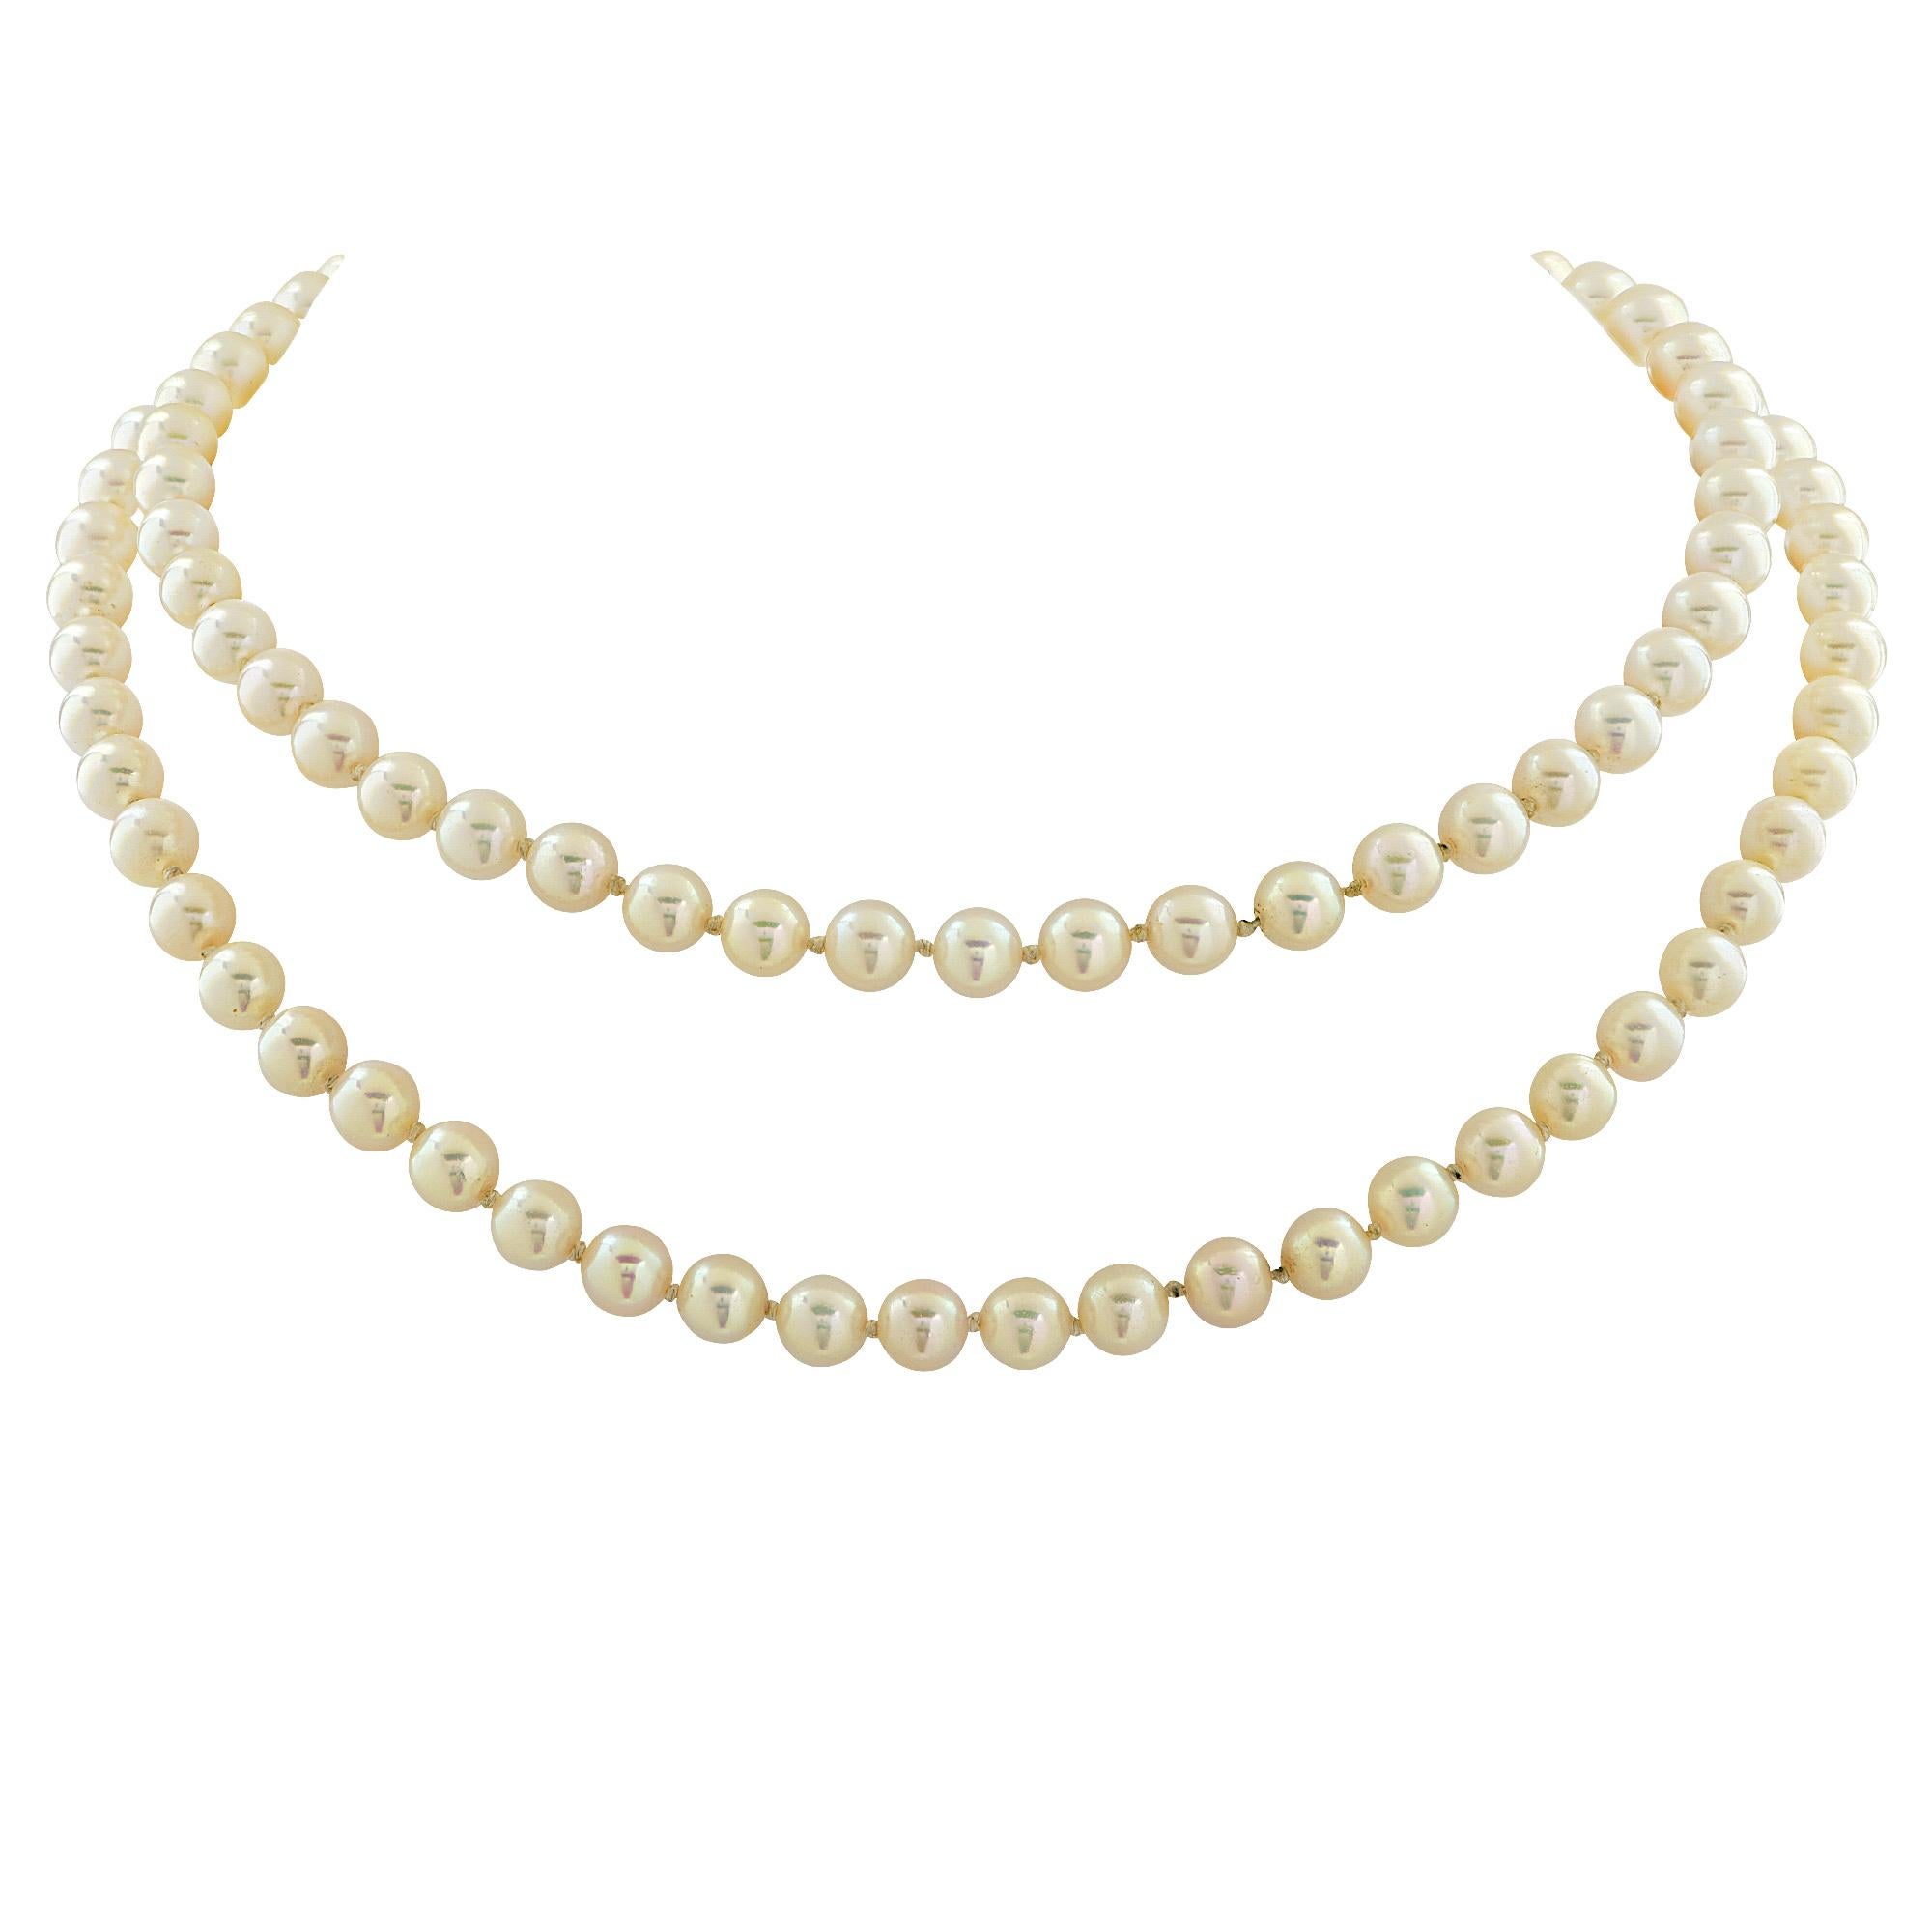 Akoya pearl necklace 5.5-6mm, 28 inch in length with a 14k yellow gold clasp.

This pearl necklace is accompanied by a retail appraisal performed by a GIA Graduate Gemologist.